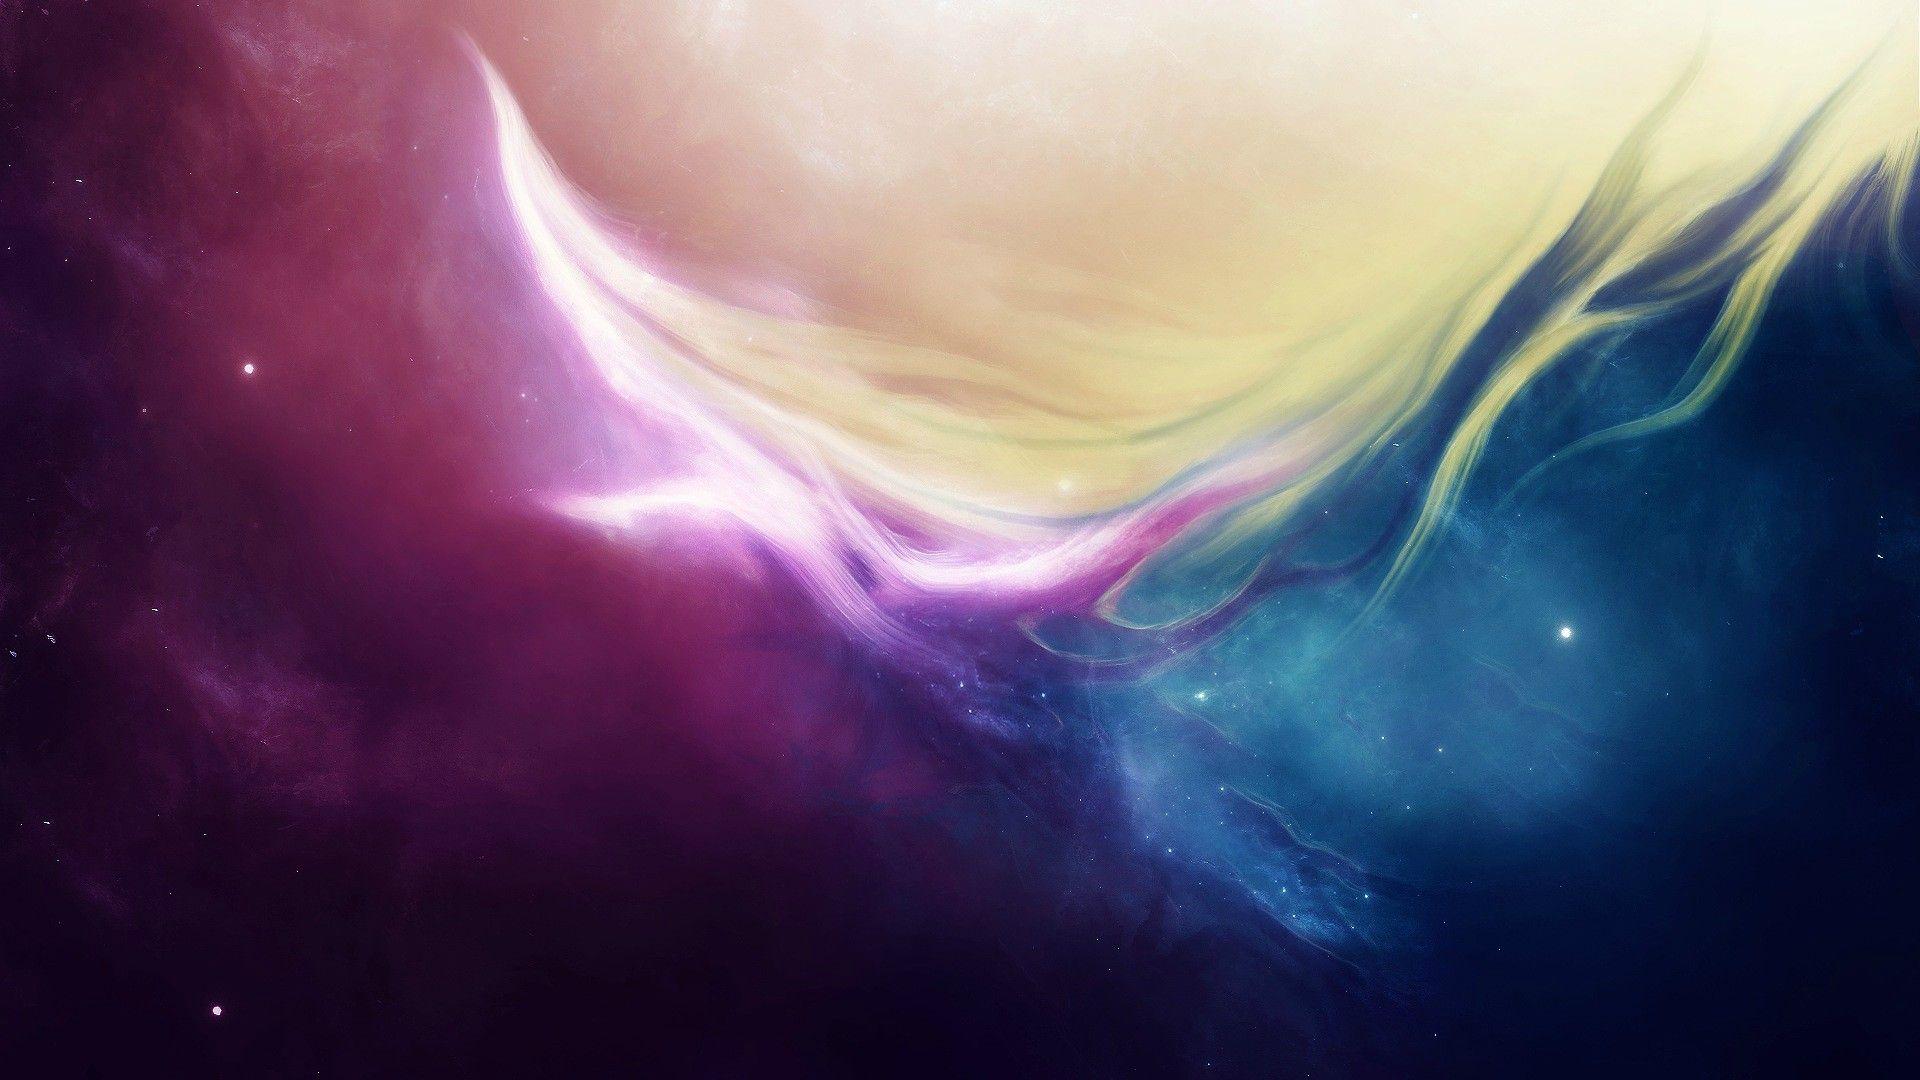 Does anyone have a link to the older 'Space' wallpaper from Luna